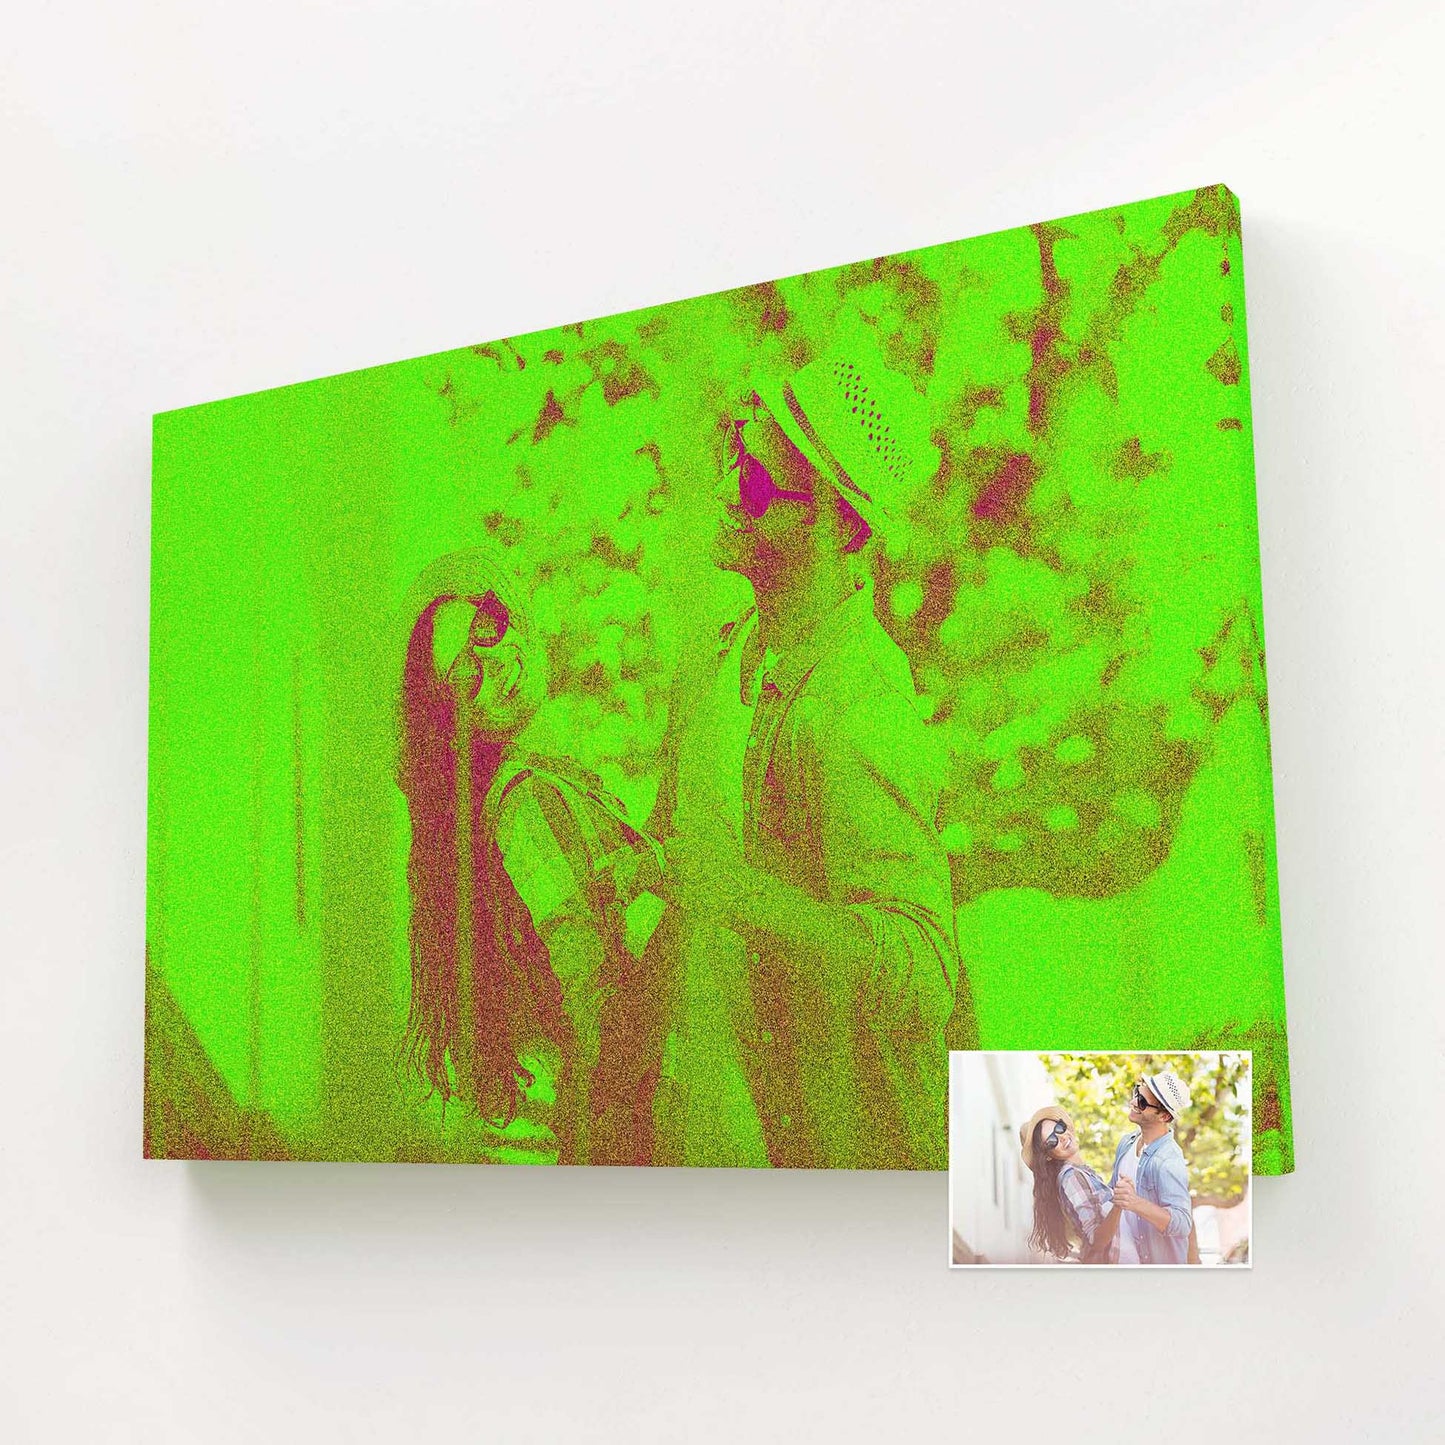 Let the bright neon green color evoke feelings of fun, laughter, and celebration, creating a lively atmosphere that will energize any space. Choose our personalised neon green canvas to bring joy and radiance into your life